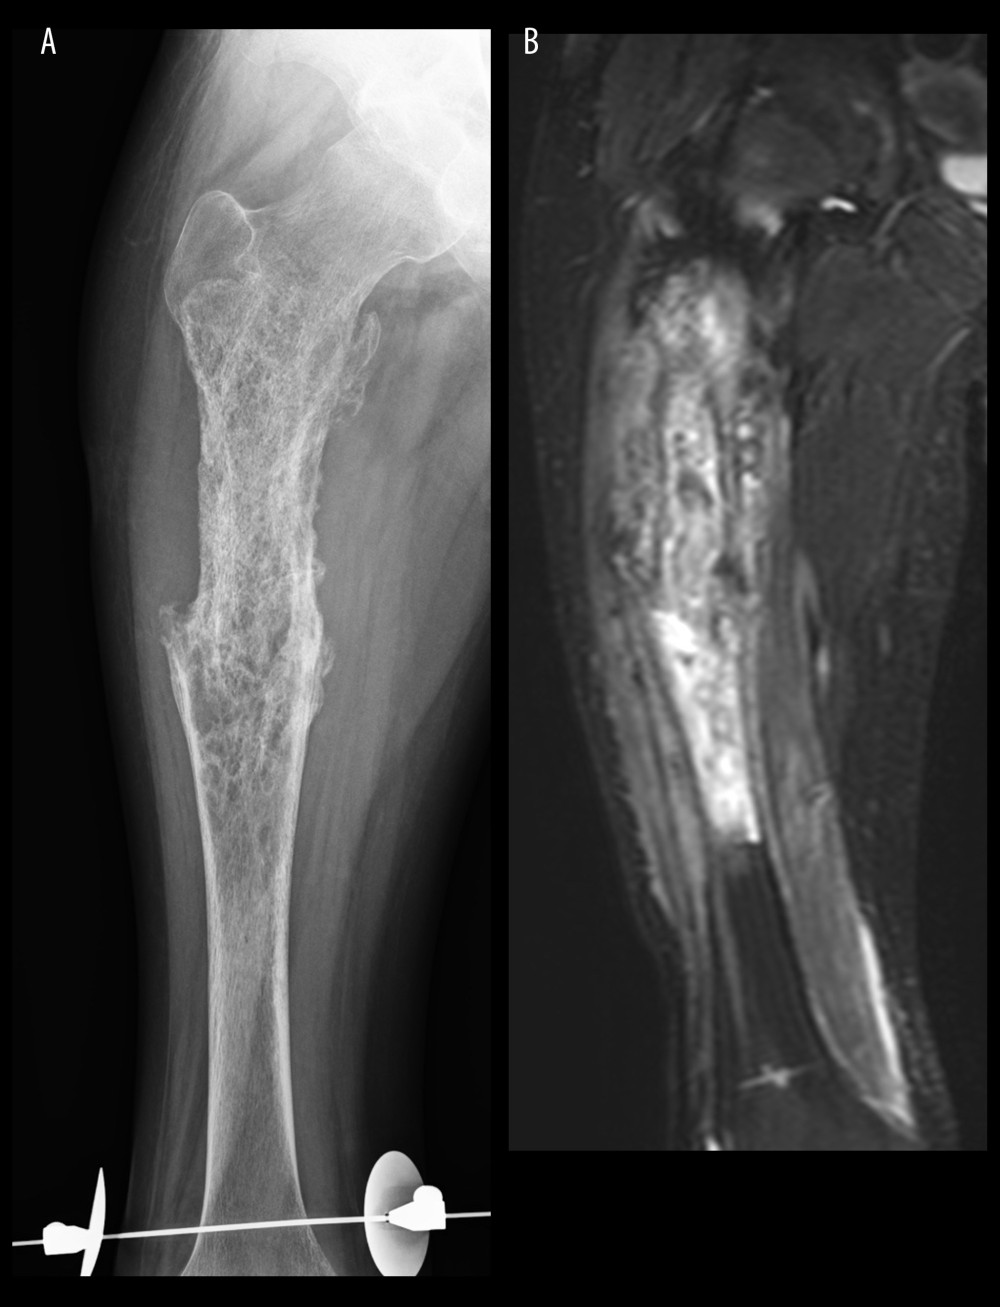 Plain radiography after preoperative chemotherapy. (A) Bone repair and union of the pathologic fracture are estimated. (B) Marked shrinkage of the tumor was obvious on magnetic resonance imaging.